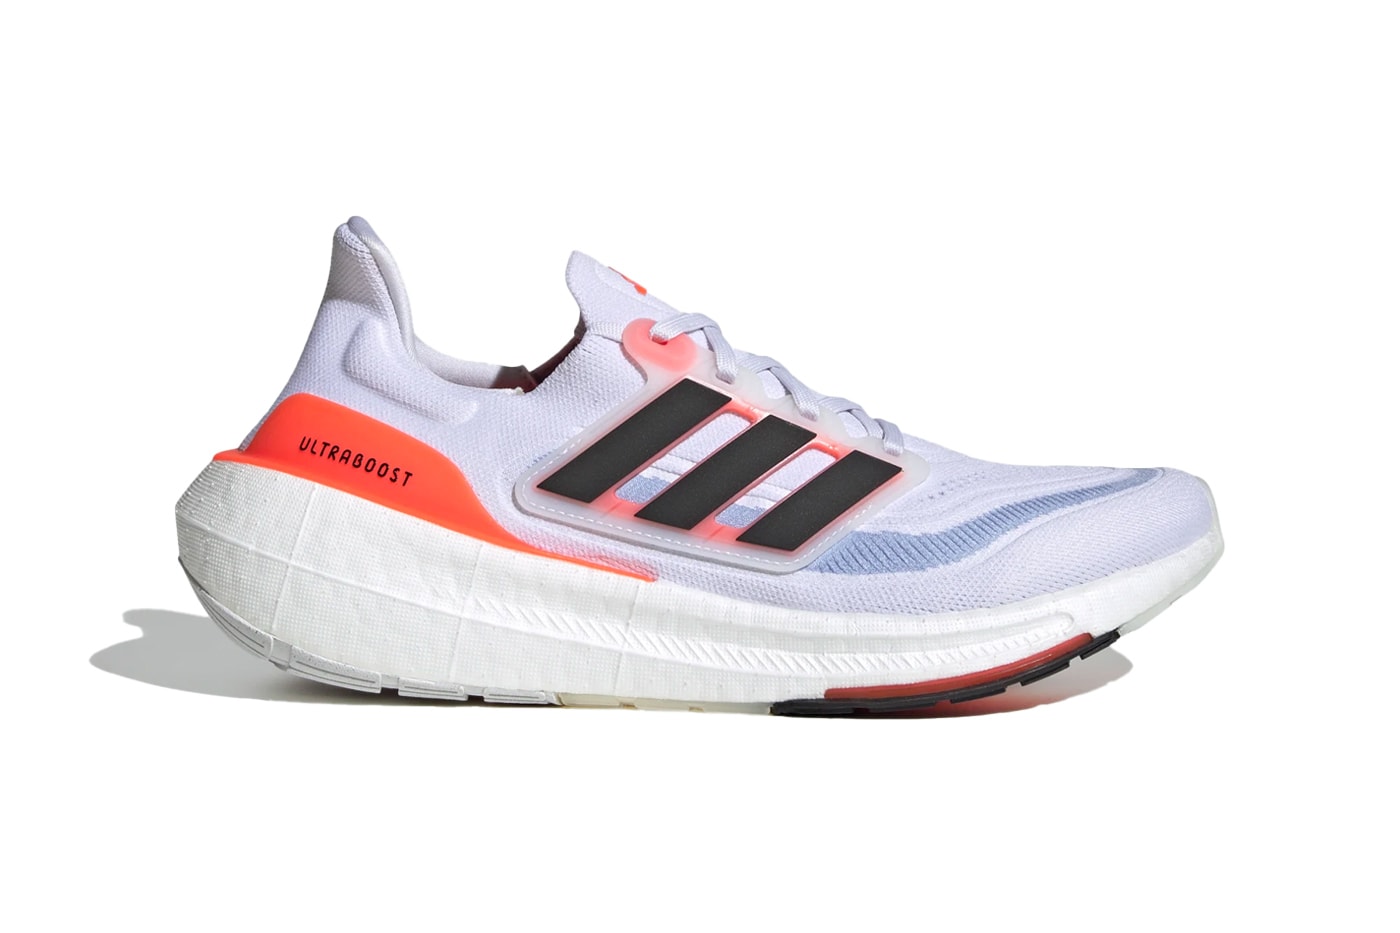 adidas Ultraboost 23 Light The best running shoes right now